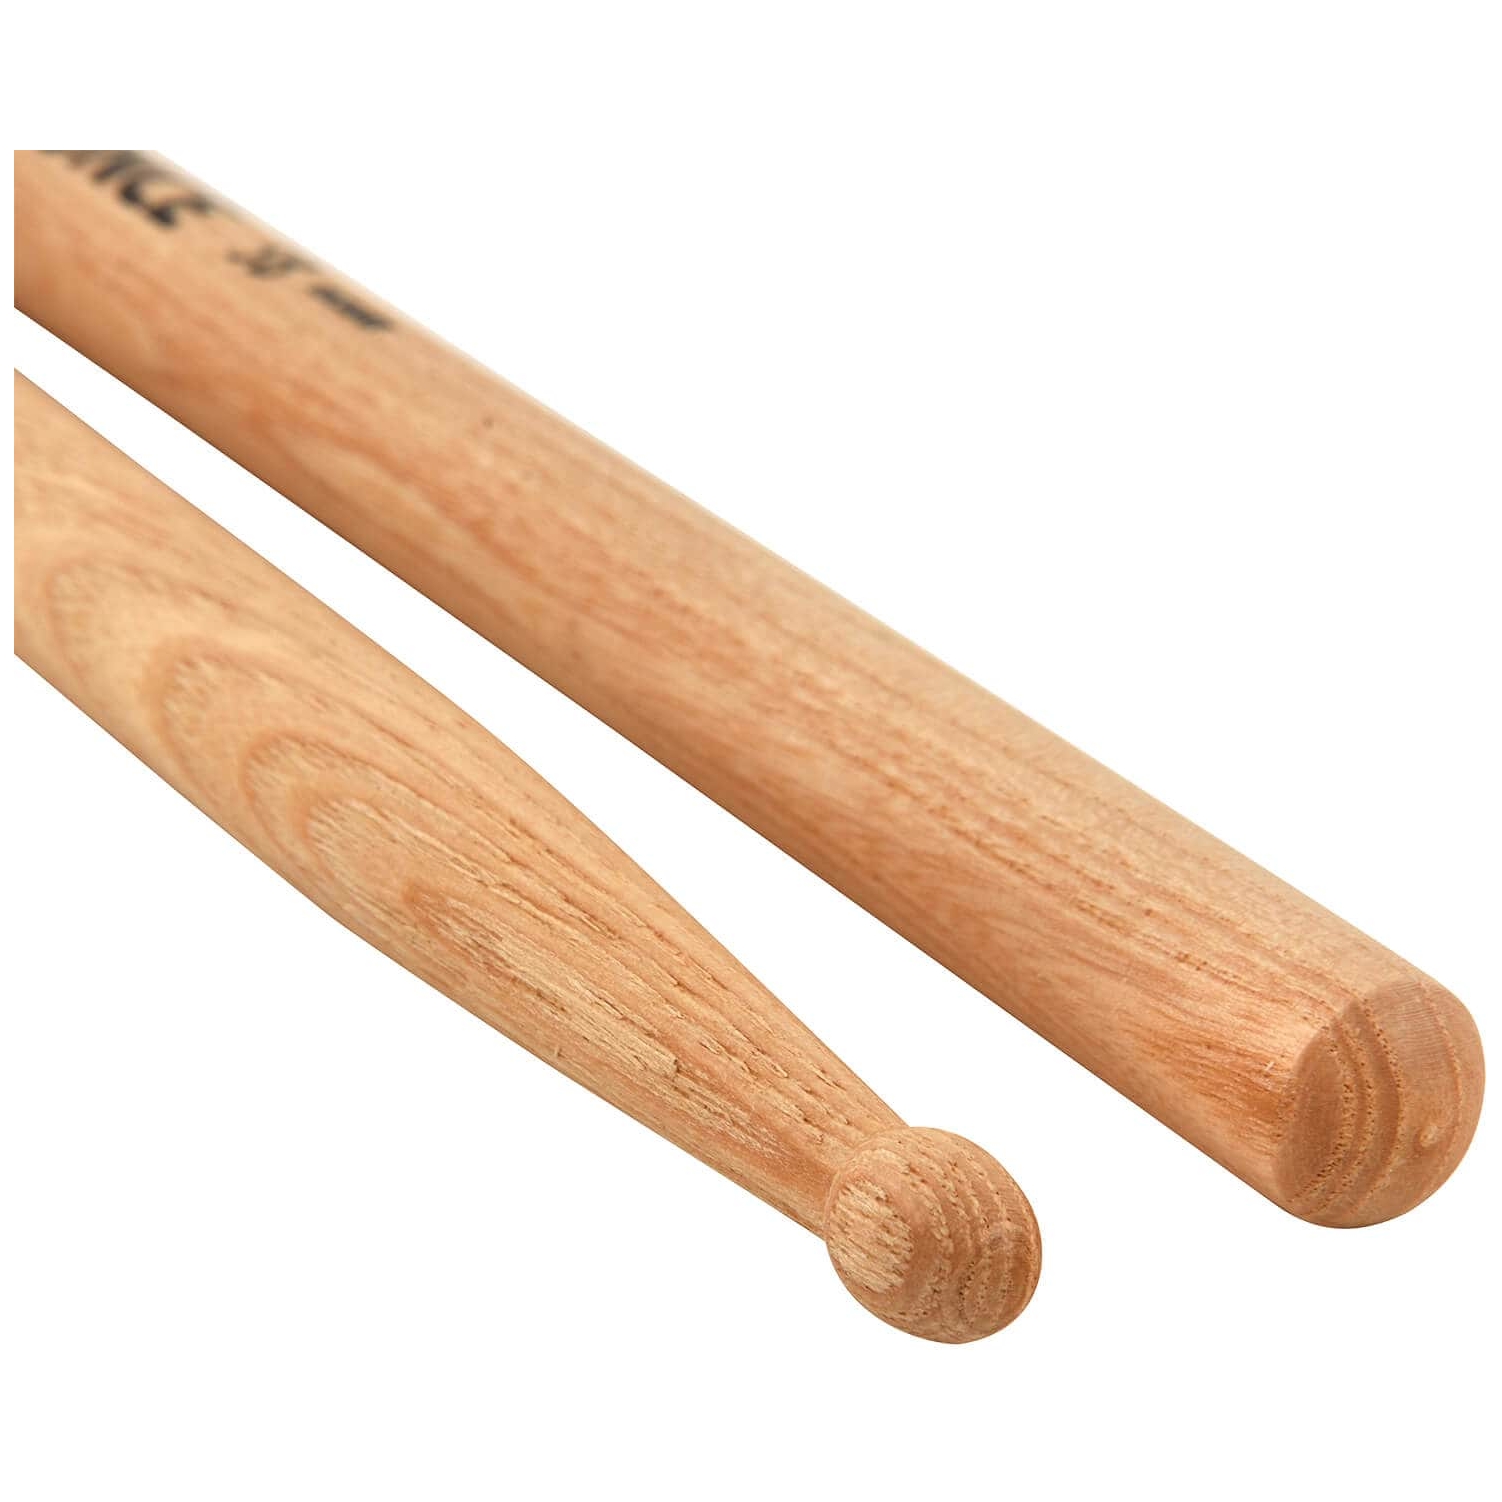 Bounce 5B Drumsticks - Hickory - Wood Tip